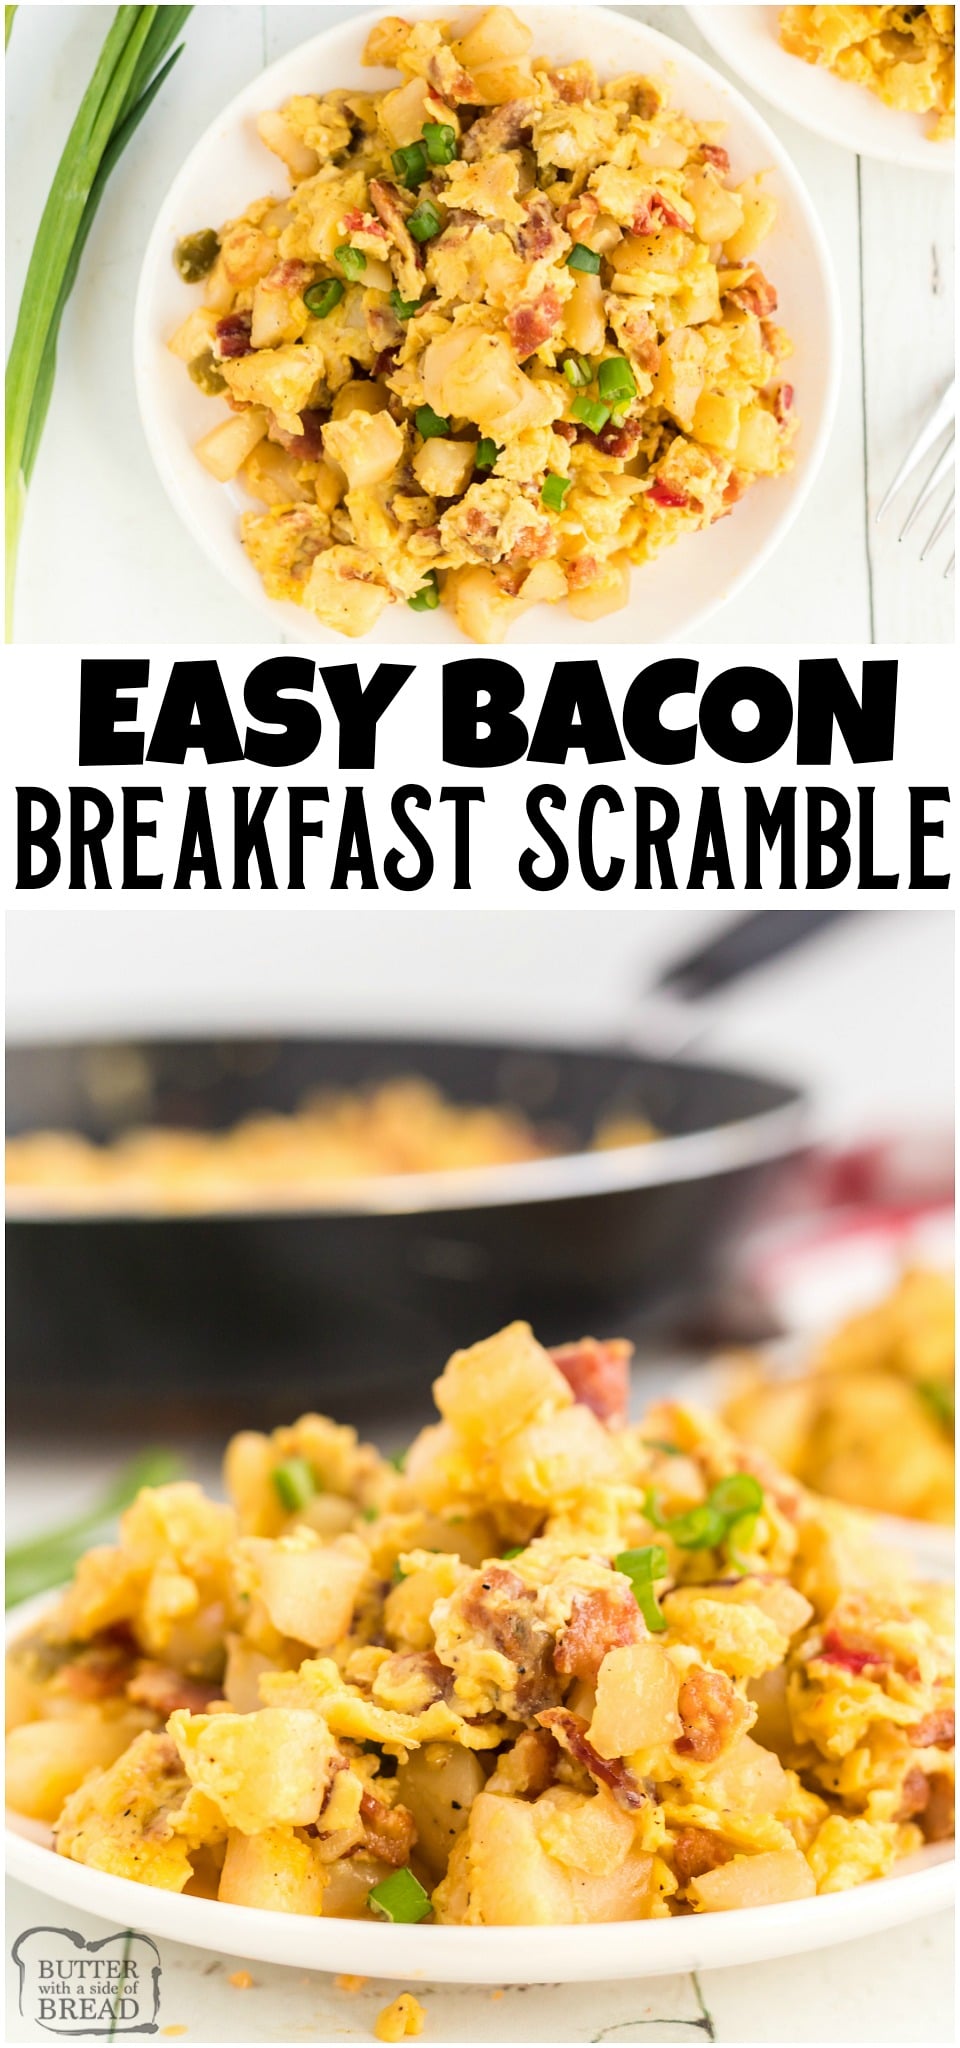 Bacon Breakfast scramble is an easy skillet breakfast casserole recipe everyone enjoys. Protein packed with eggs, bacon and hash brown potatoes, this scramble comes together fast and can feed a crowd! #bacon #eggs #breakfast #scrambled #protein #morning #recipe from BUTTER WITH A SIDE OF BREAD